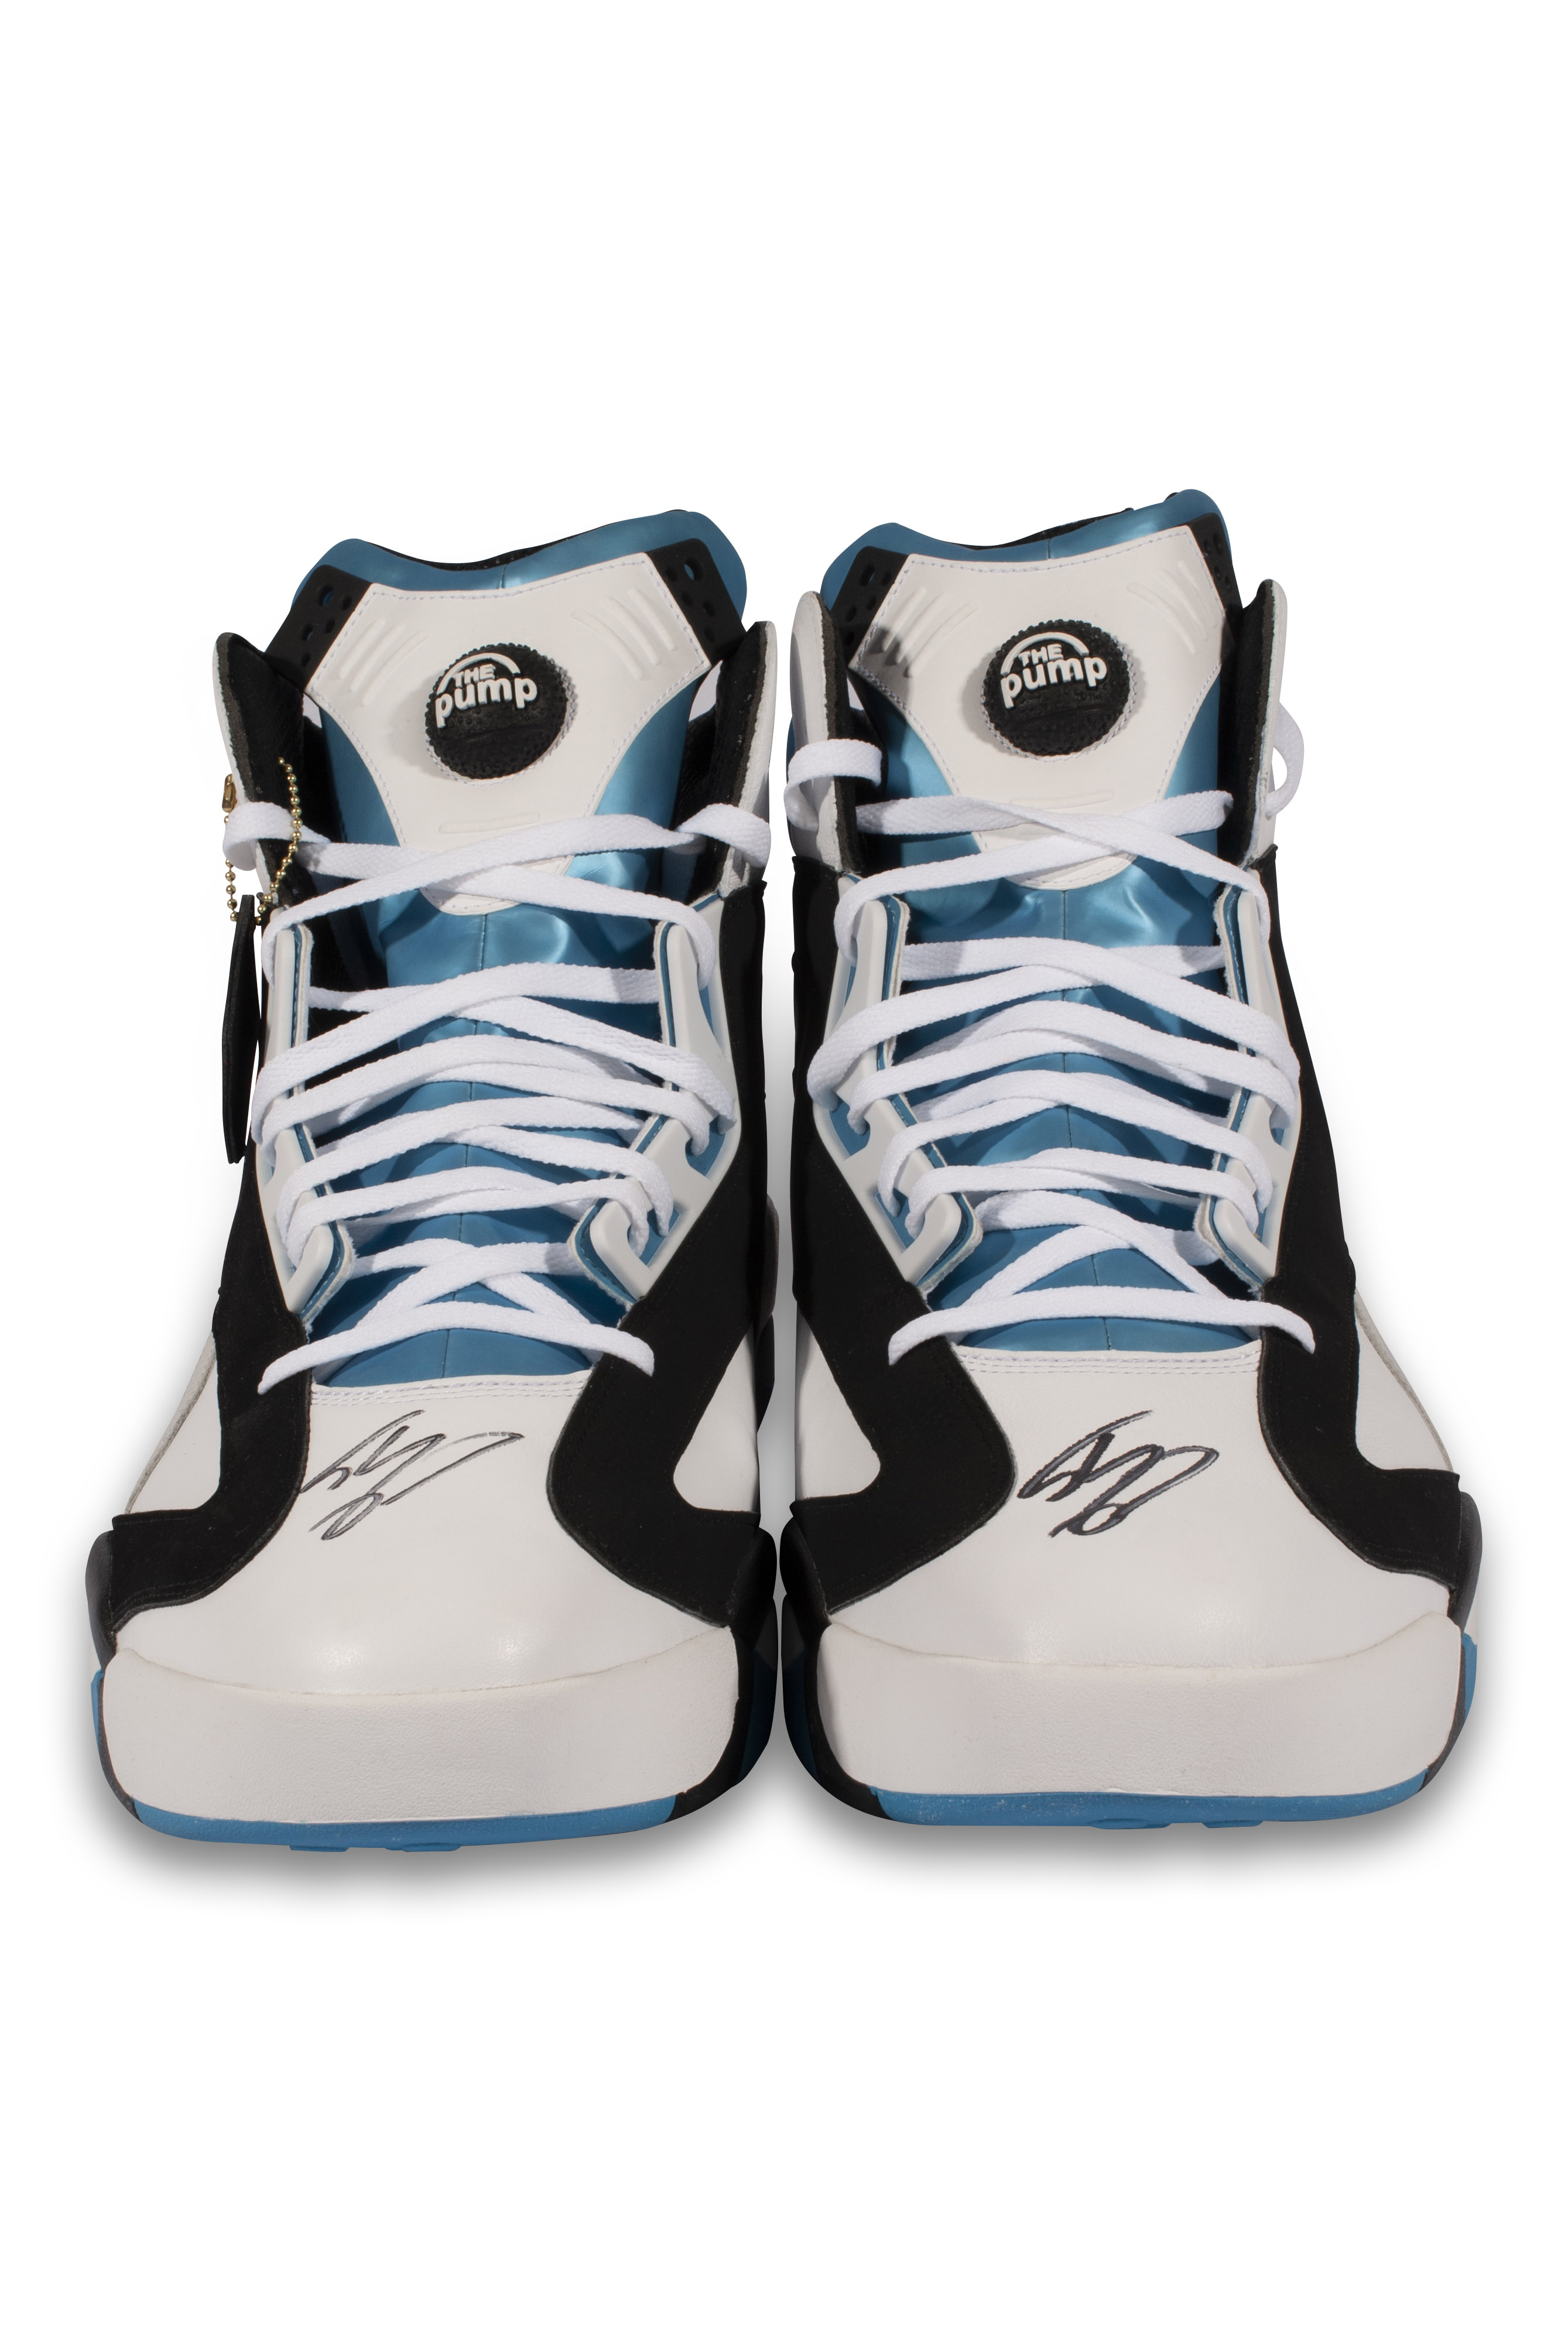 A signed size 22 Reebok Shaq Attaq sneaker on display as Reebok News  Photo - Getty Images